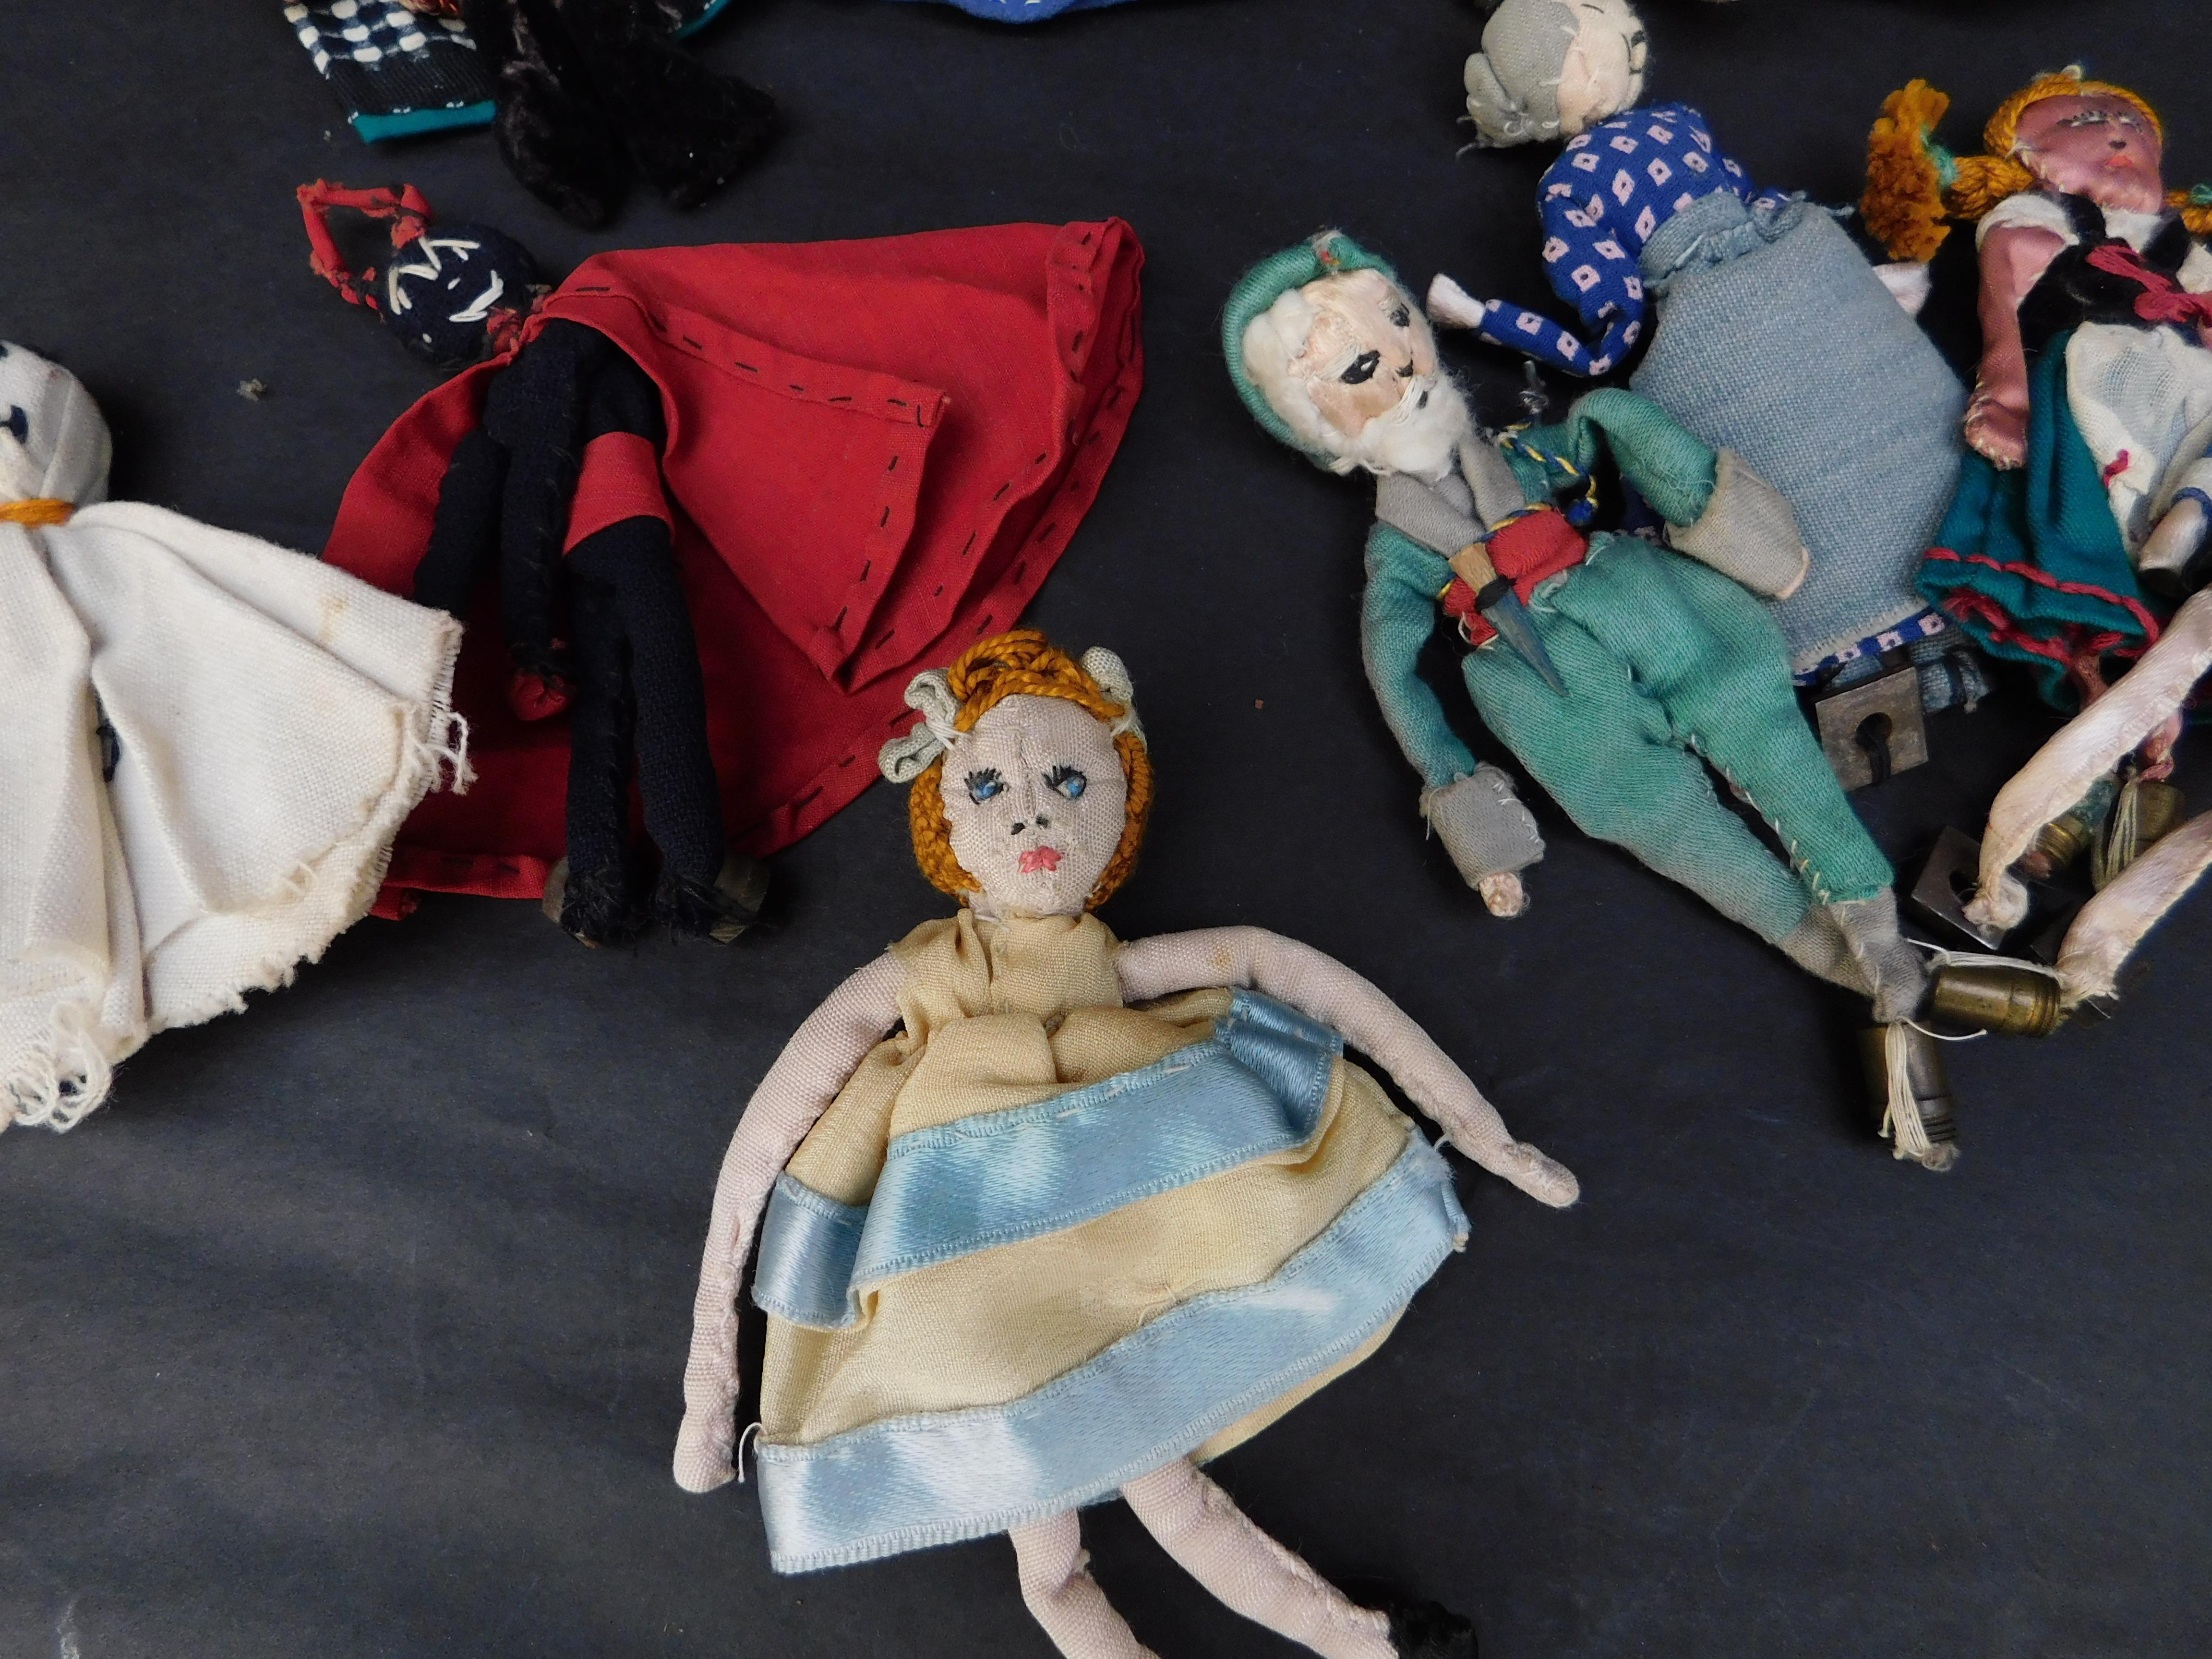 Hand made in the 1940s these 19 small marionette dolls were used entertain children with the stories of several different fairy tales.
Sleeping beauty, Cinderella, Hansel and Gretel, Red riding hood, and more.
Look at the close up photos in order